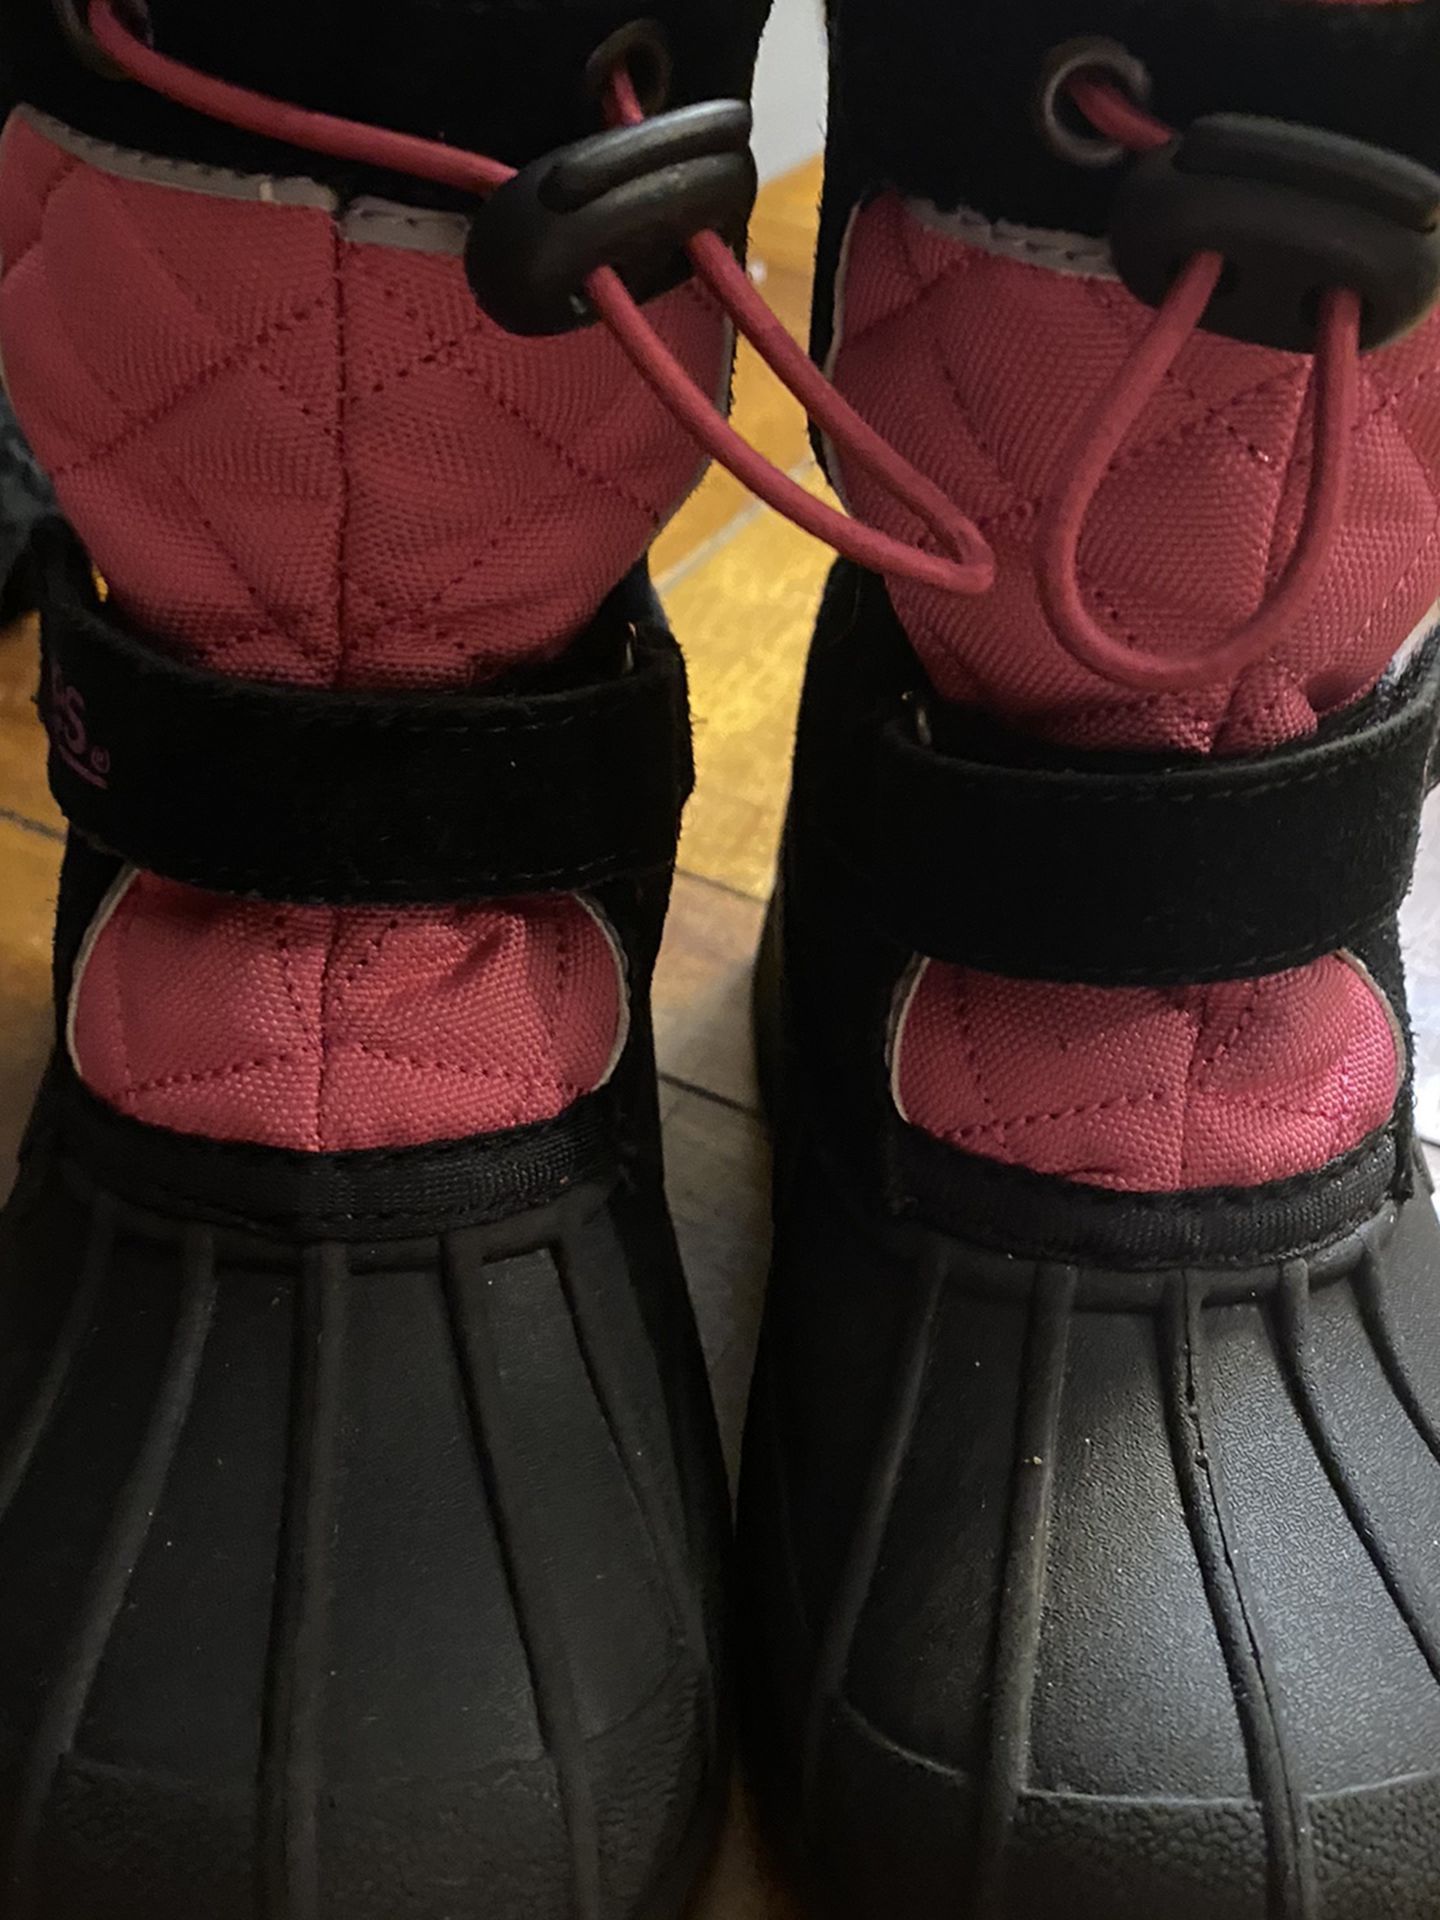 Girls Snow Boots Totes Like New Size 9